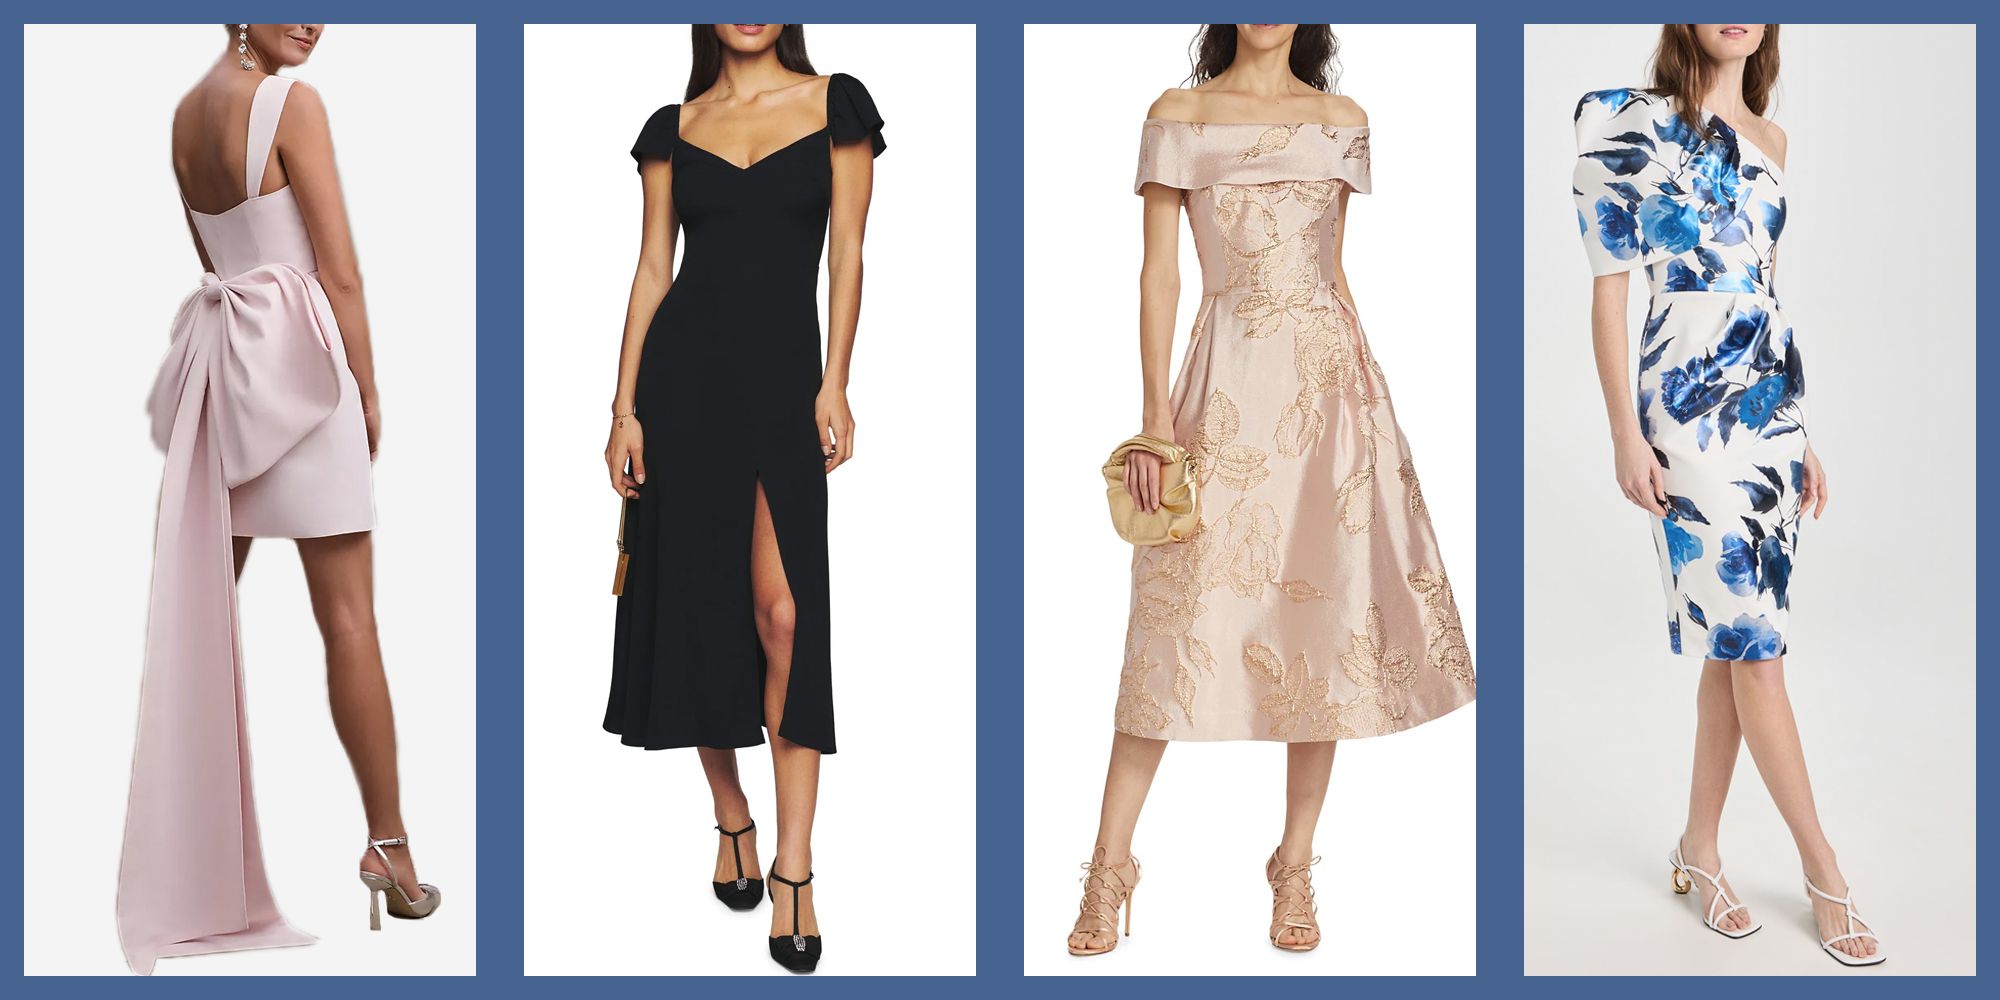 Best Cocktail Dresses for Weddings in Every Style